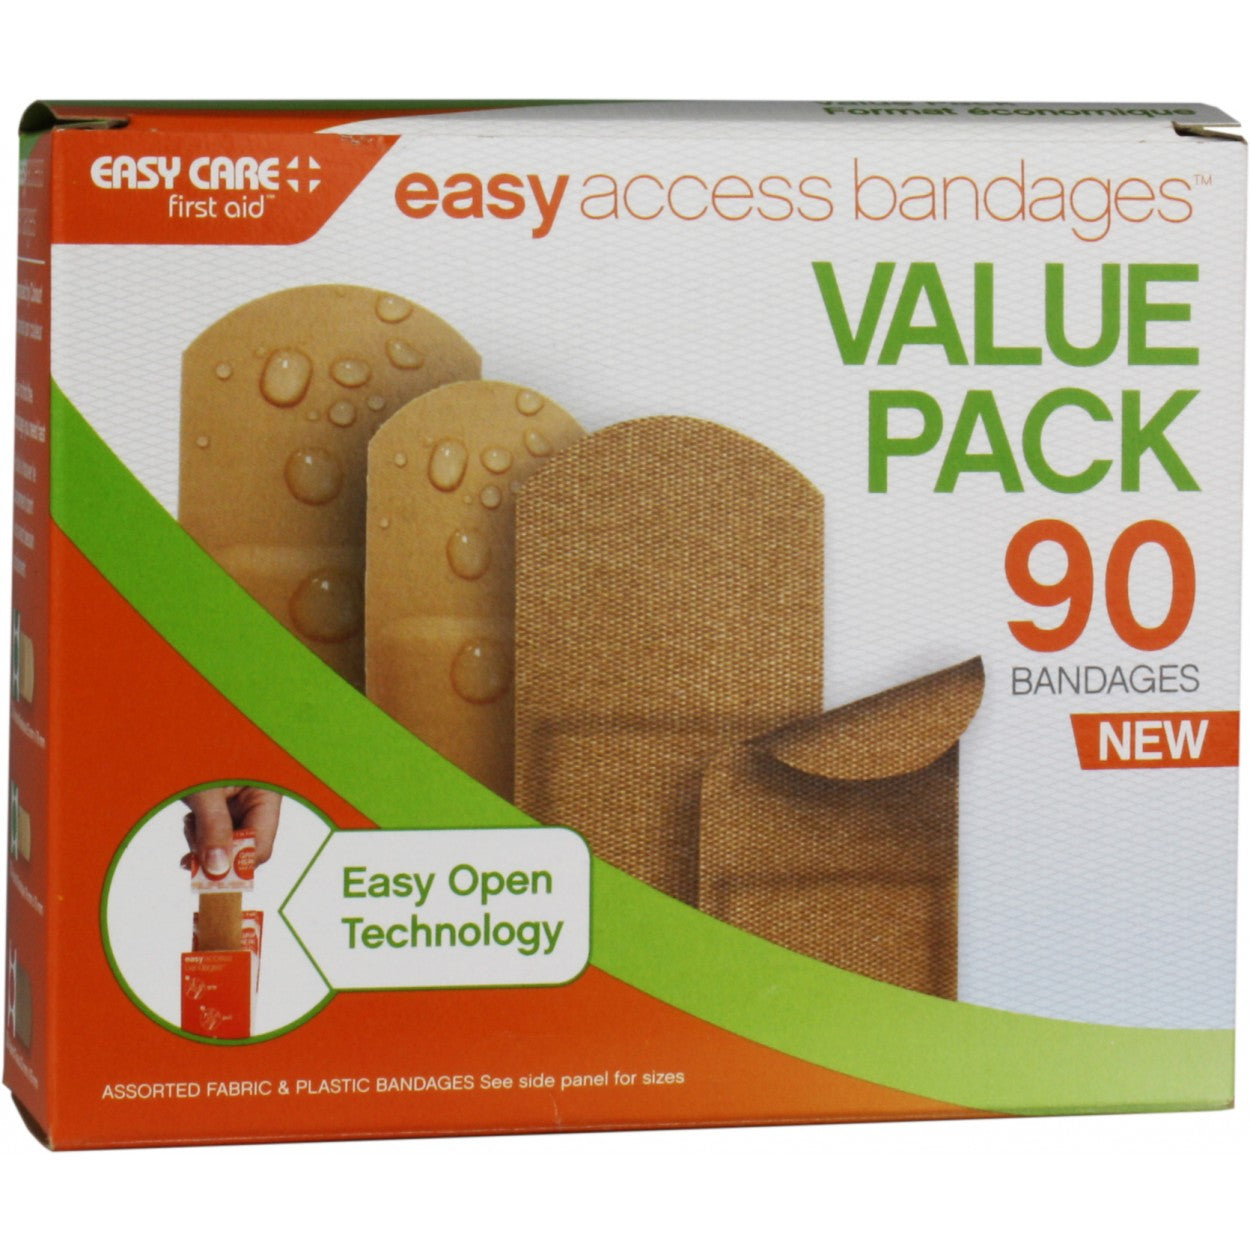 Easy Care Easy Access Bandages Value Pack